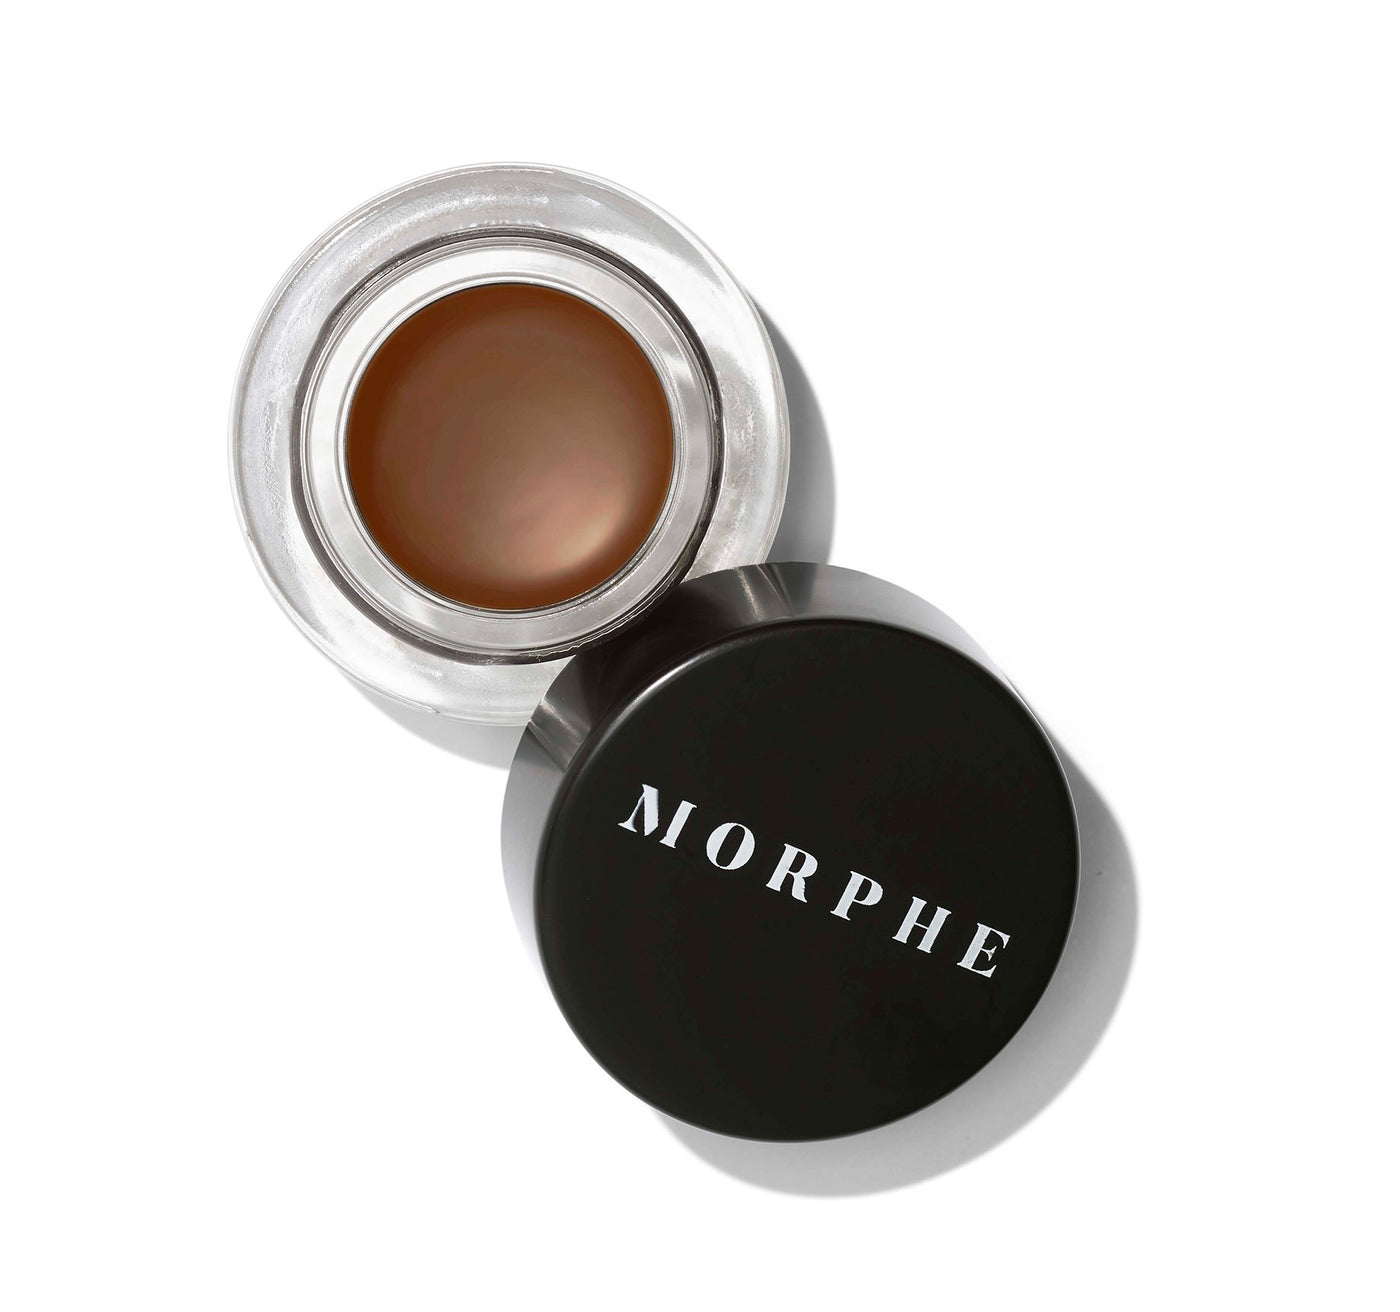 Morphe Arch Obsessions Eyebrow Kit